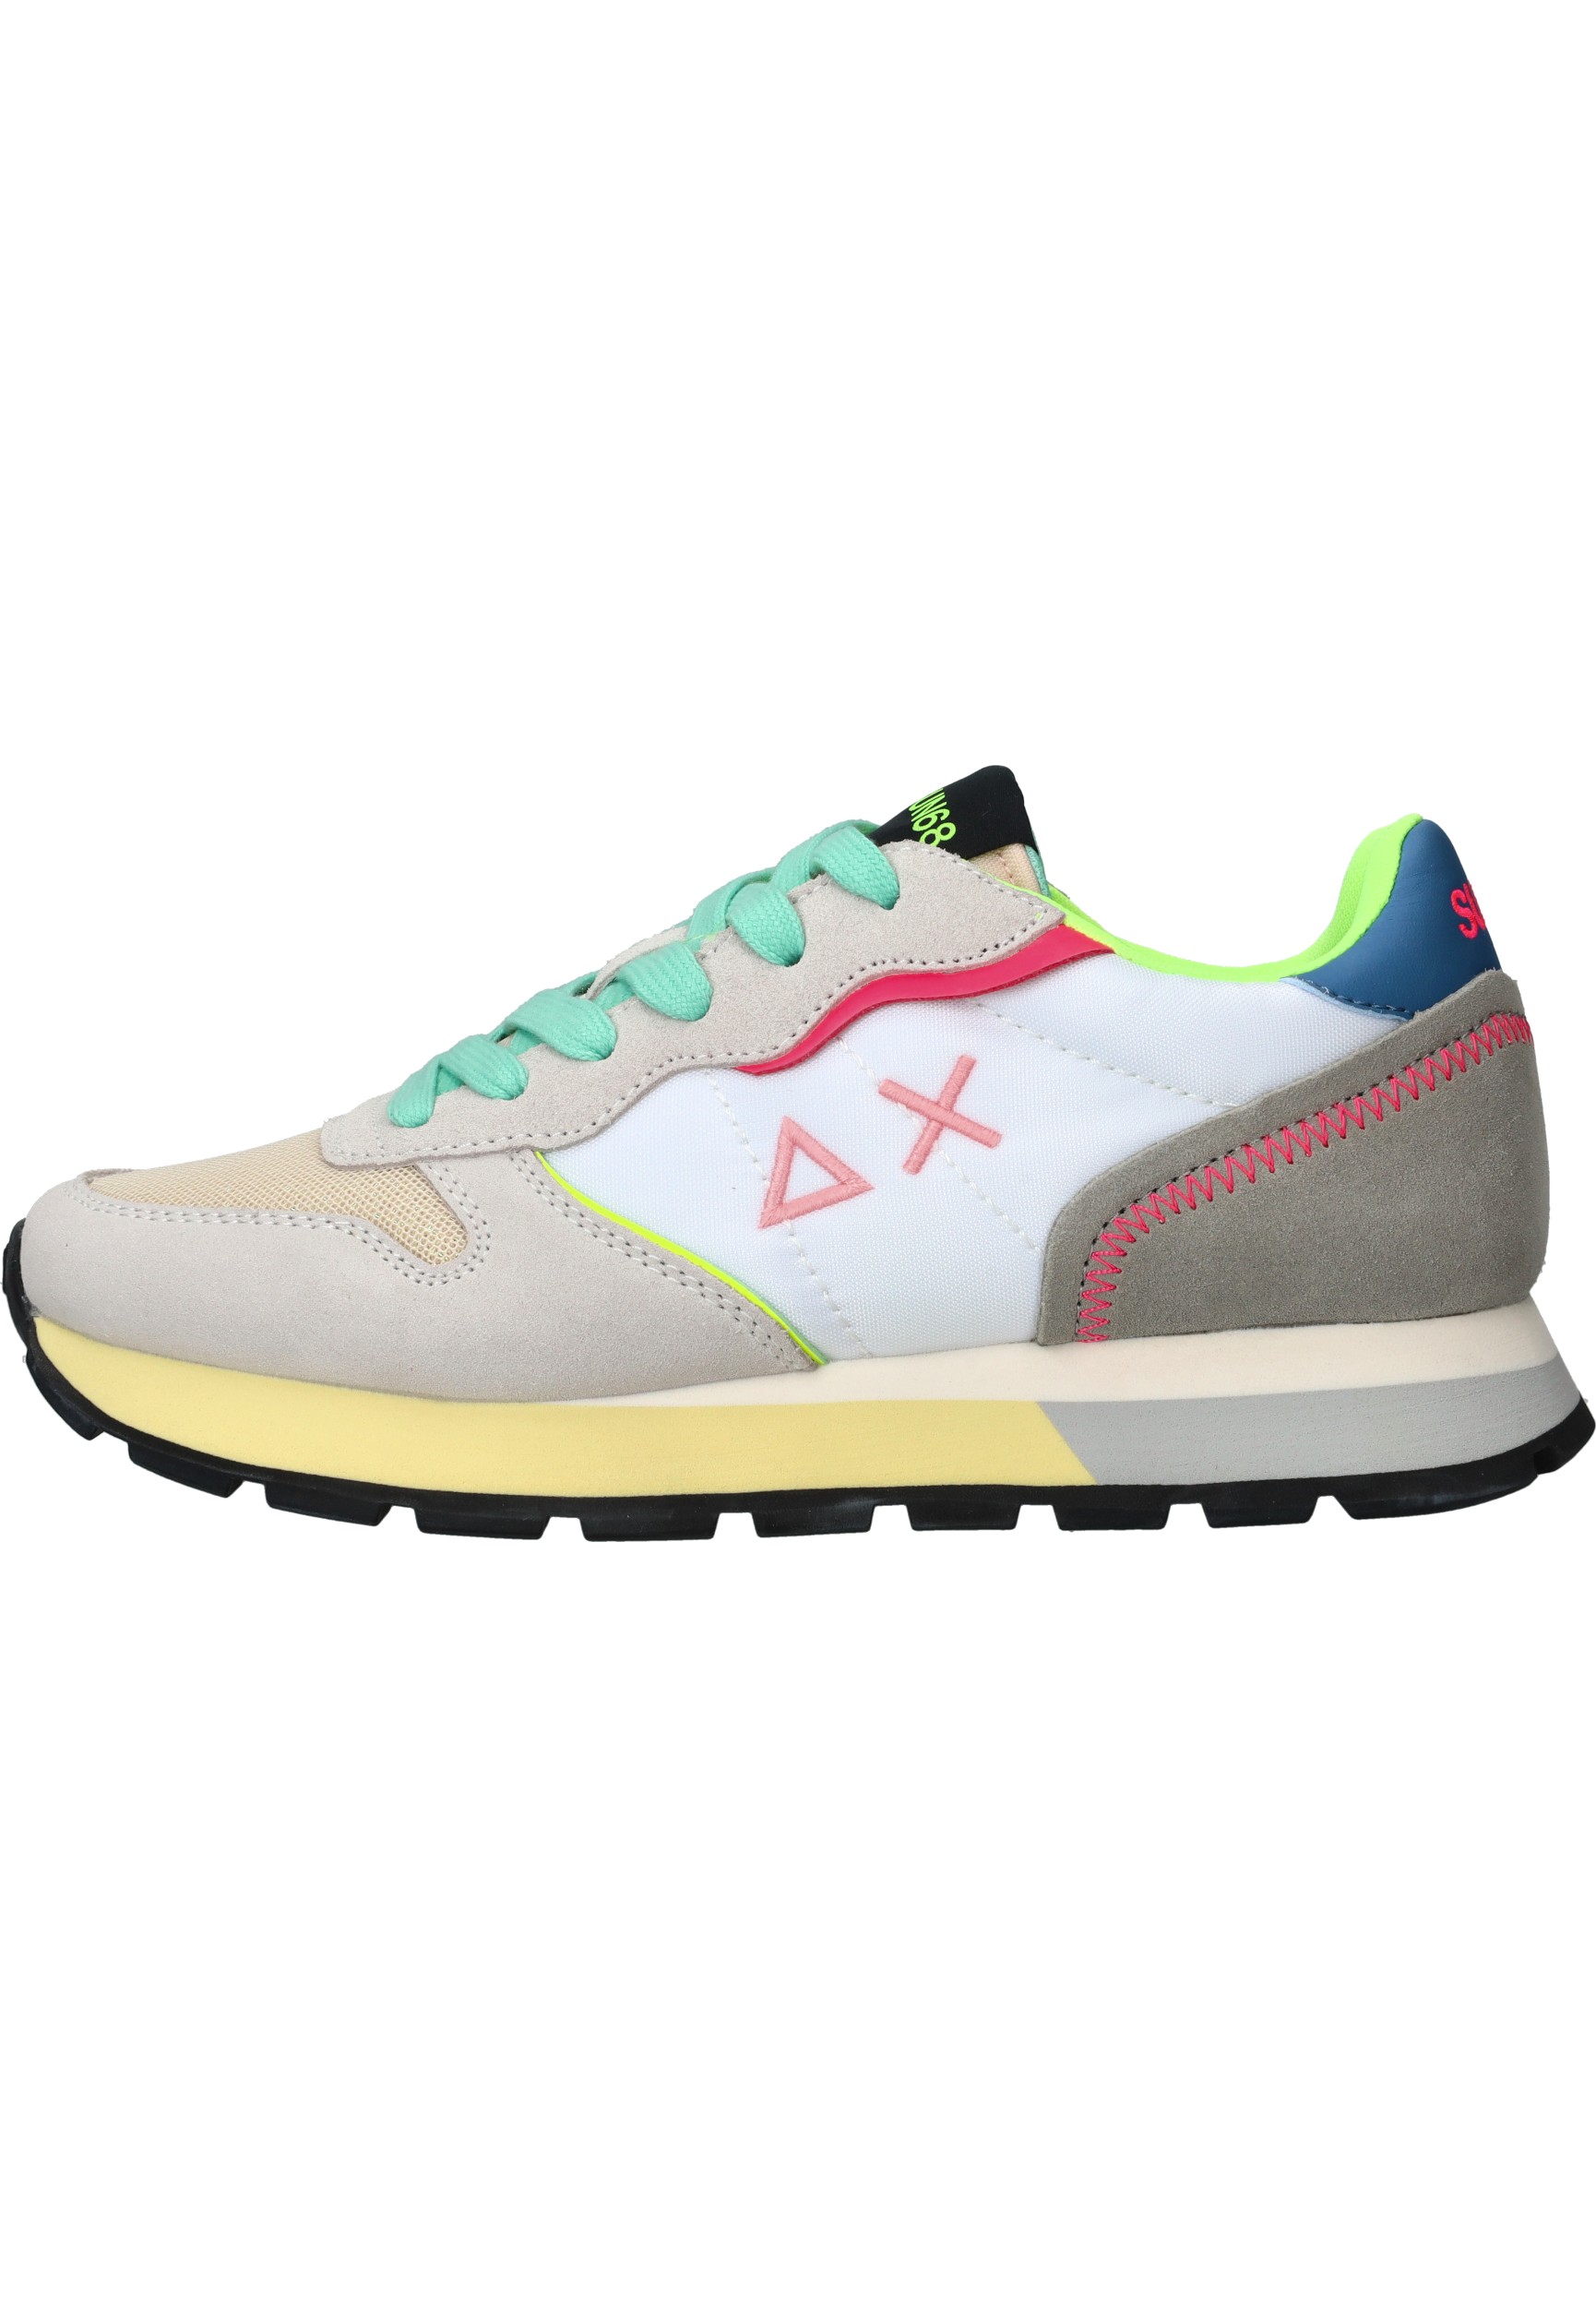 Sun 68 Ally Color explosion dames sneaker - Wit multi - Maat 36